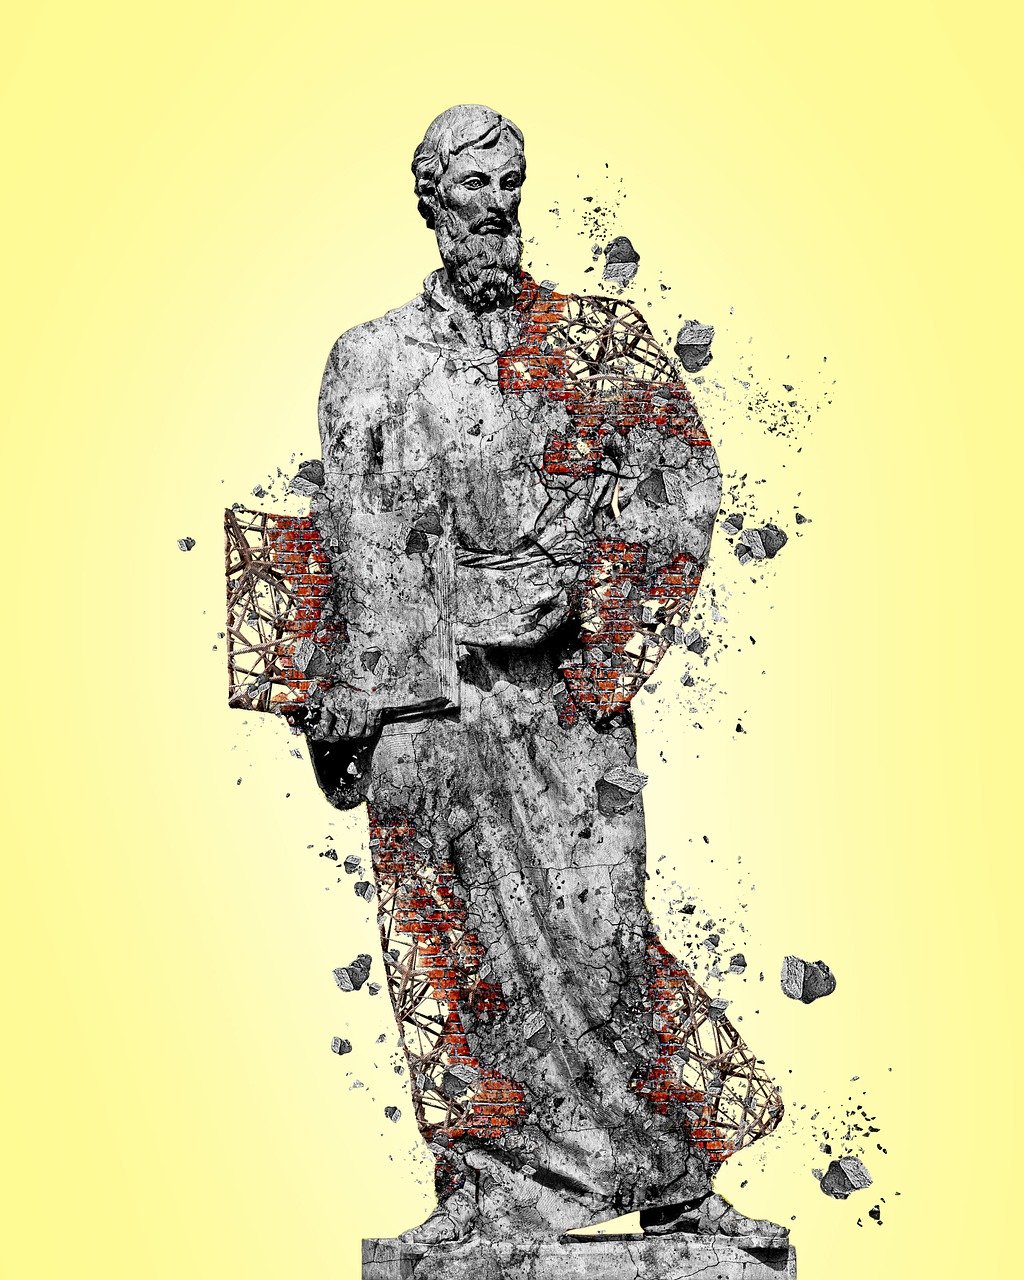 a statue of a man holding a bird cage, a statue, inspired by Constantine Andreou, neo-figurative, collage art background, the god particle, high contrast illustration, grizzled